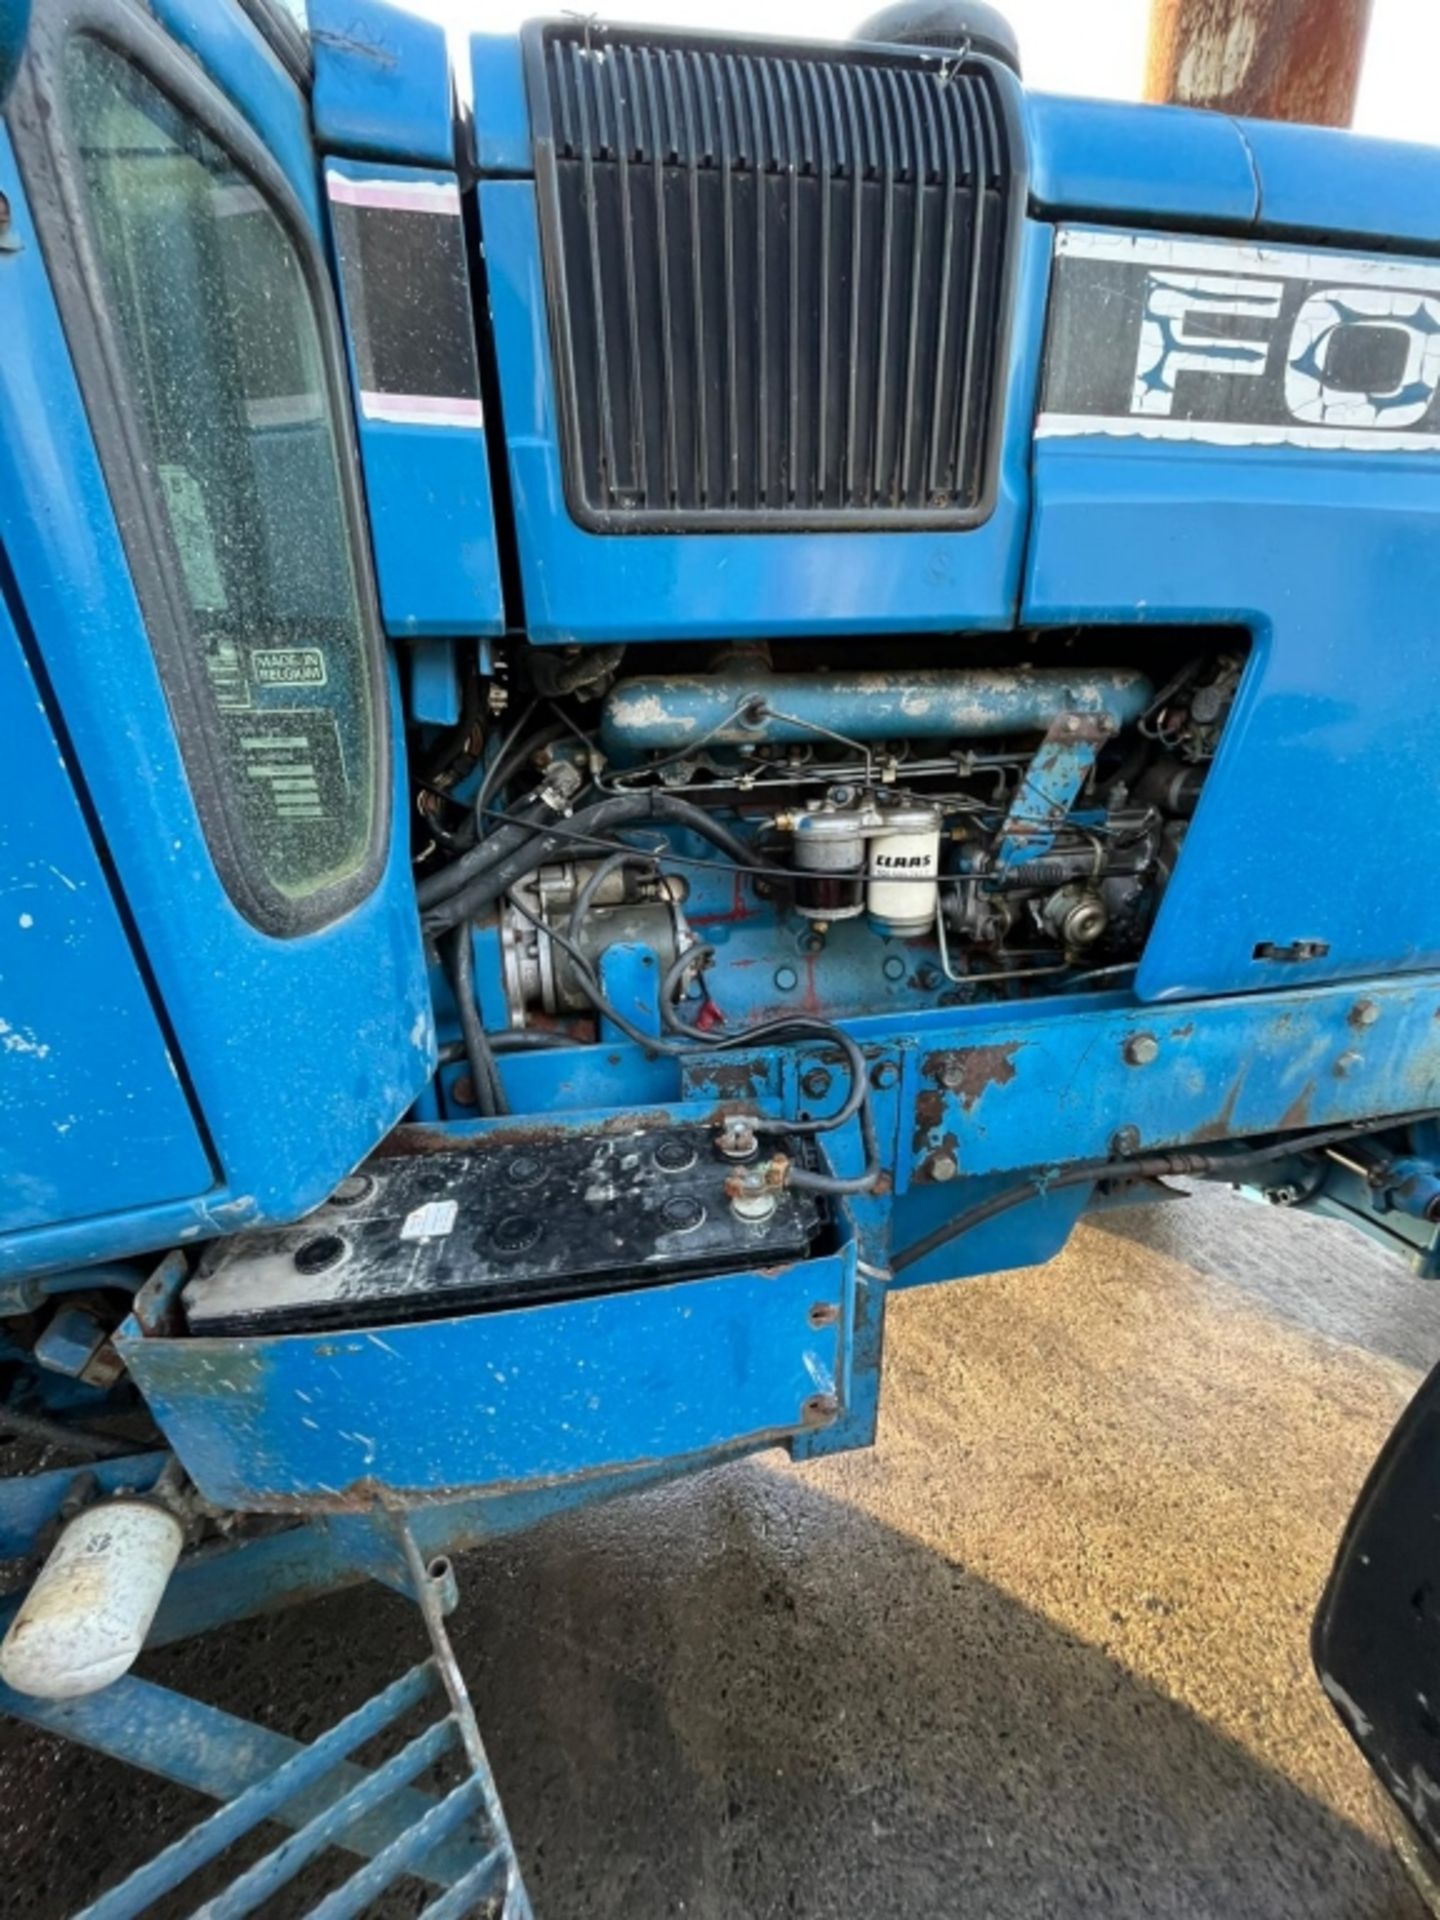 FORD 8730 POWERSHIFT TRACTOR - Image 15 of 36